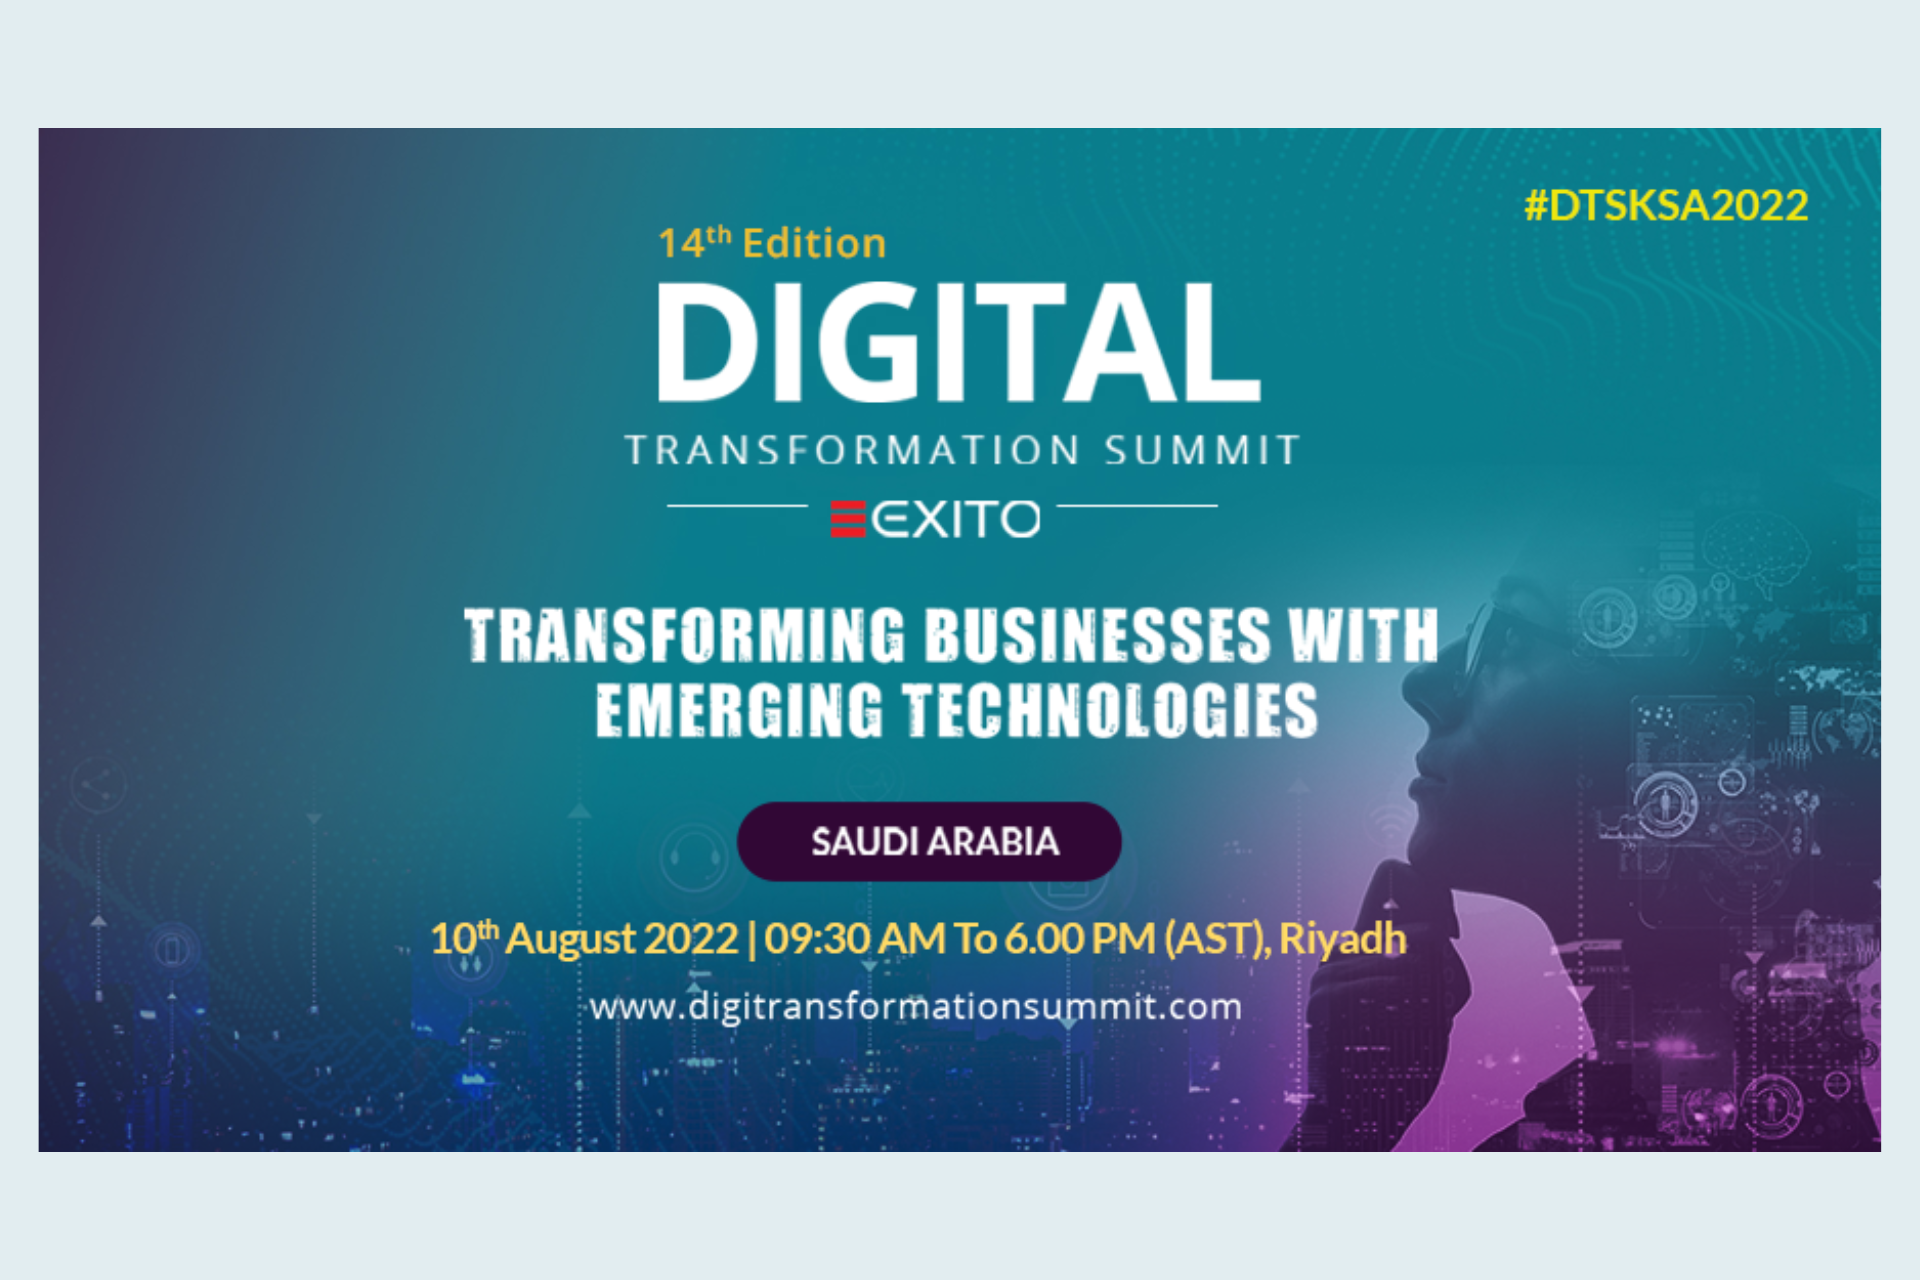 14th Edition of DTS Saudi Arabia- Physical Conference on 10th August 2022